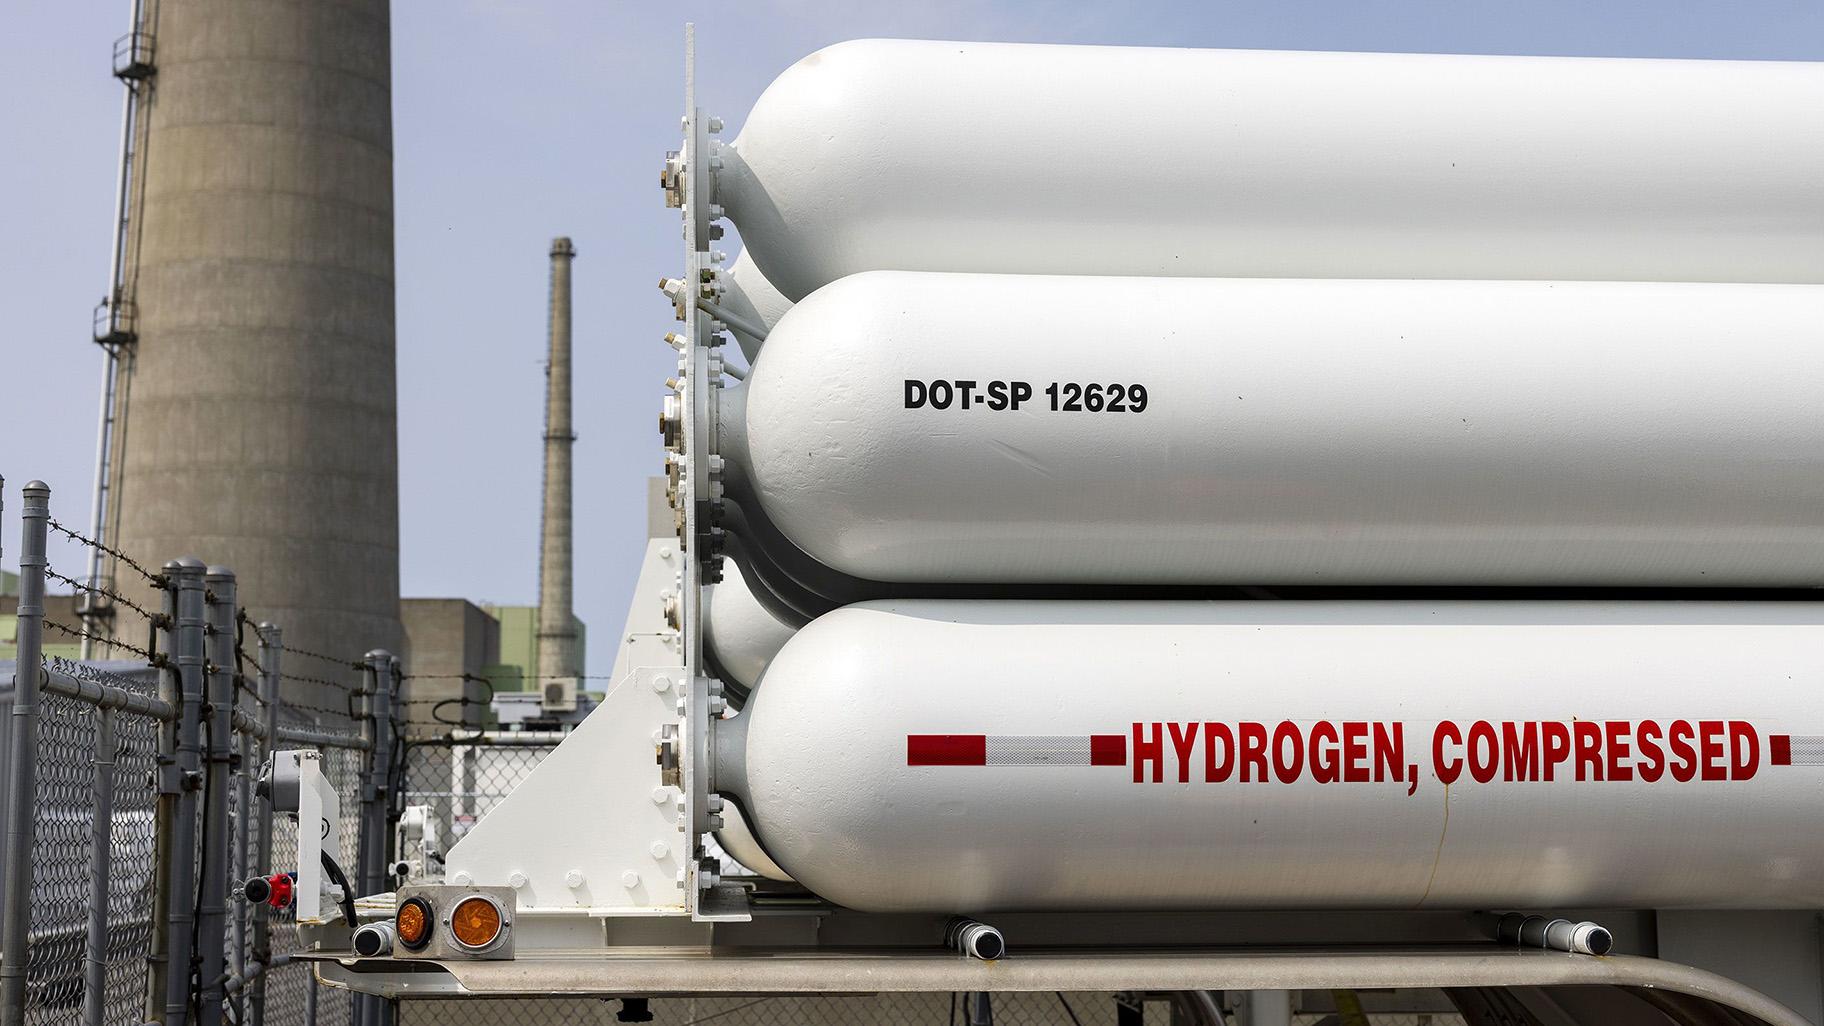 Hydrogen tanks in a storage area at the Constellation Nine Mile Point Nuclear Station in Scriba, New York, on May 9, 2023. (Lauren Petracca / Bloomberg / Getty Images via CNN)